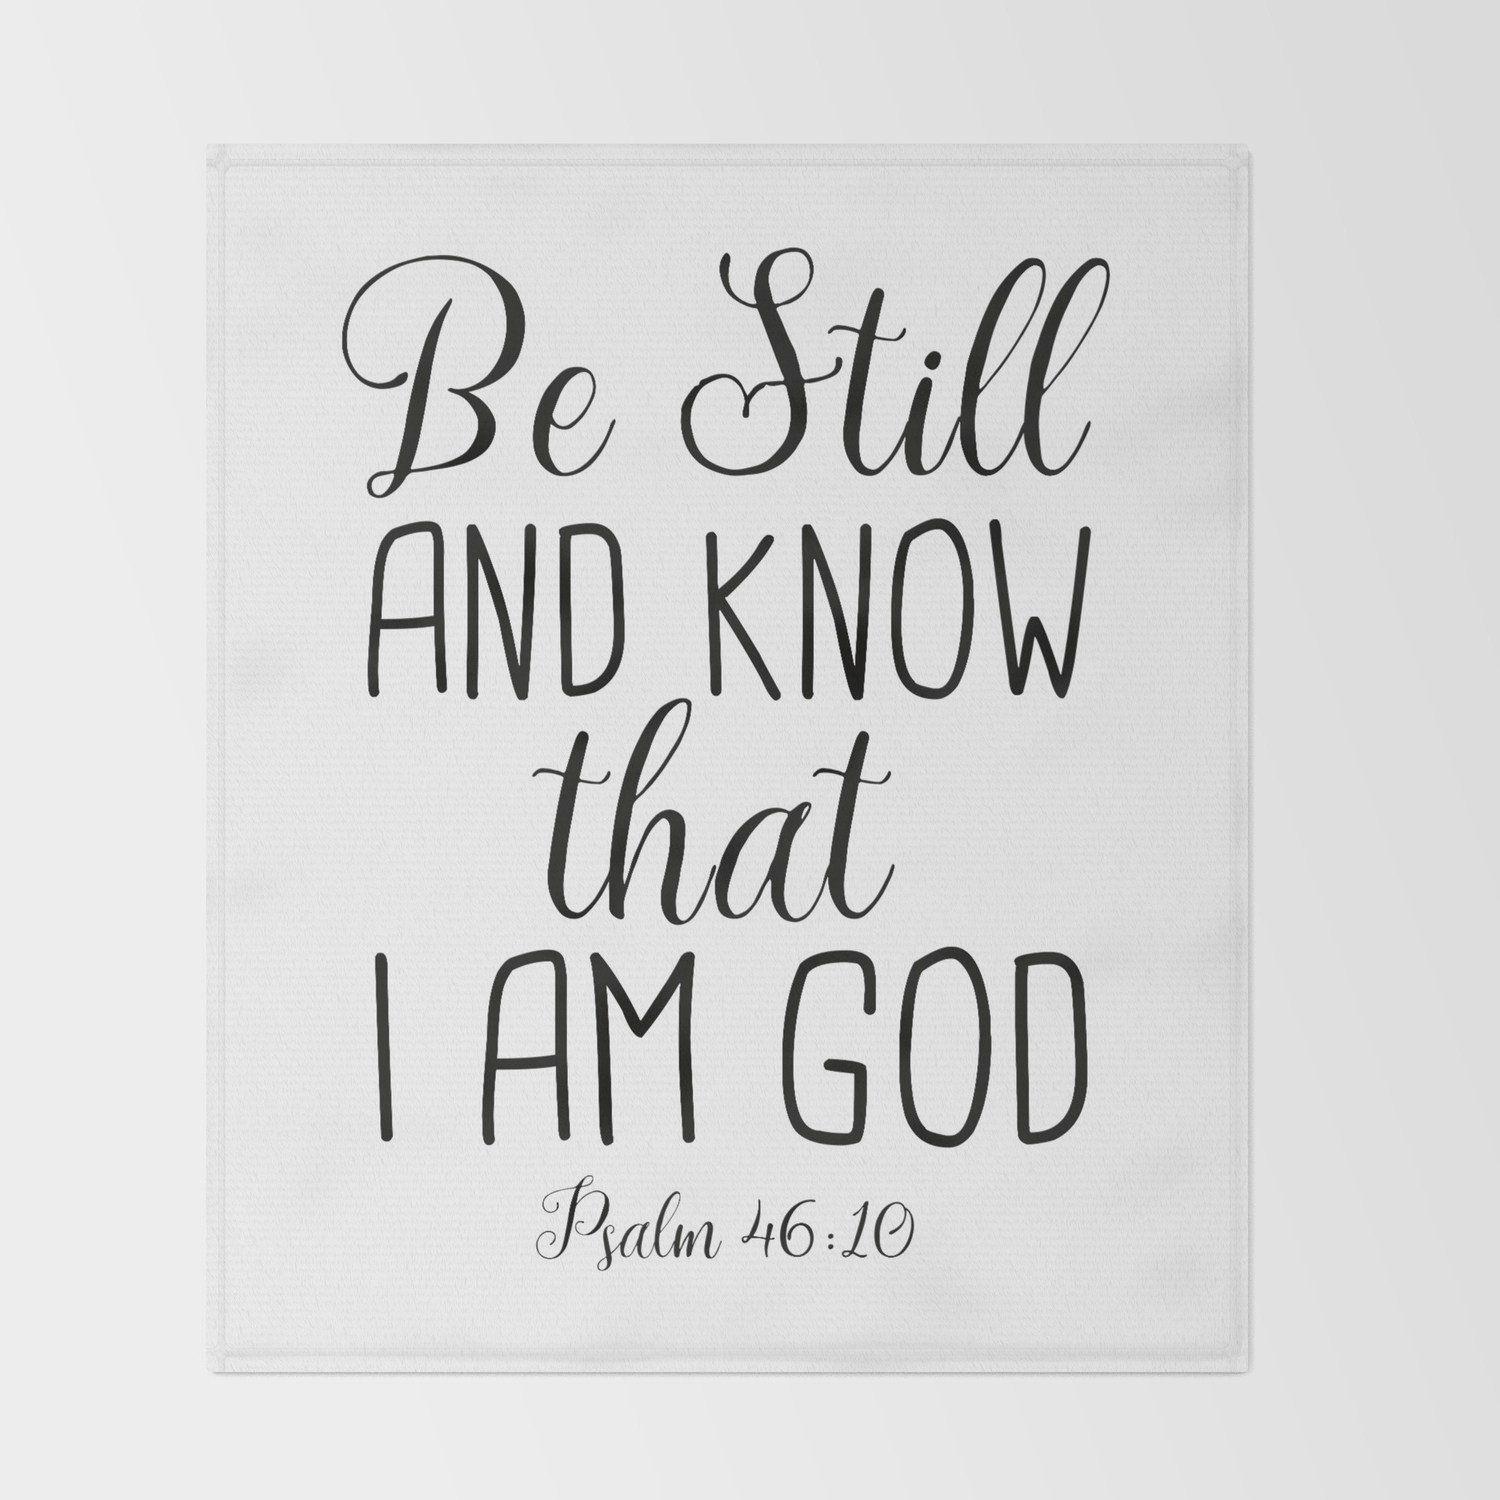 BE STILL & KNOW THAT I AM GOD PSALM 46:10 THOMAS KINKAID Licensed Quilted Throw 